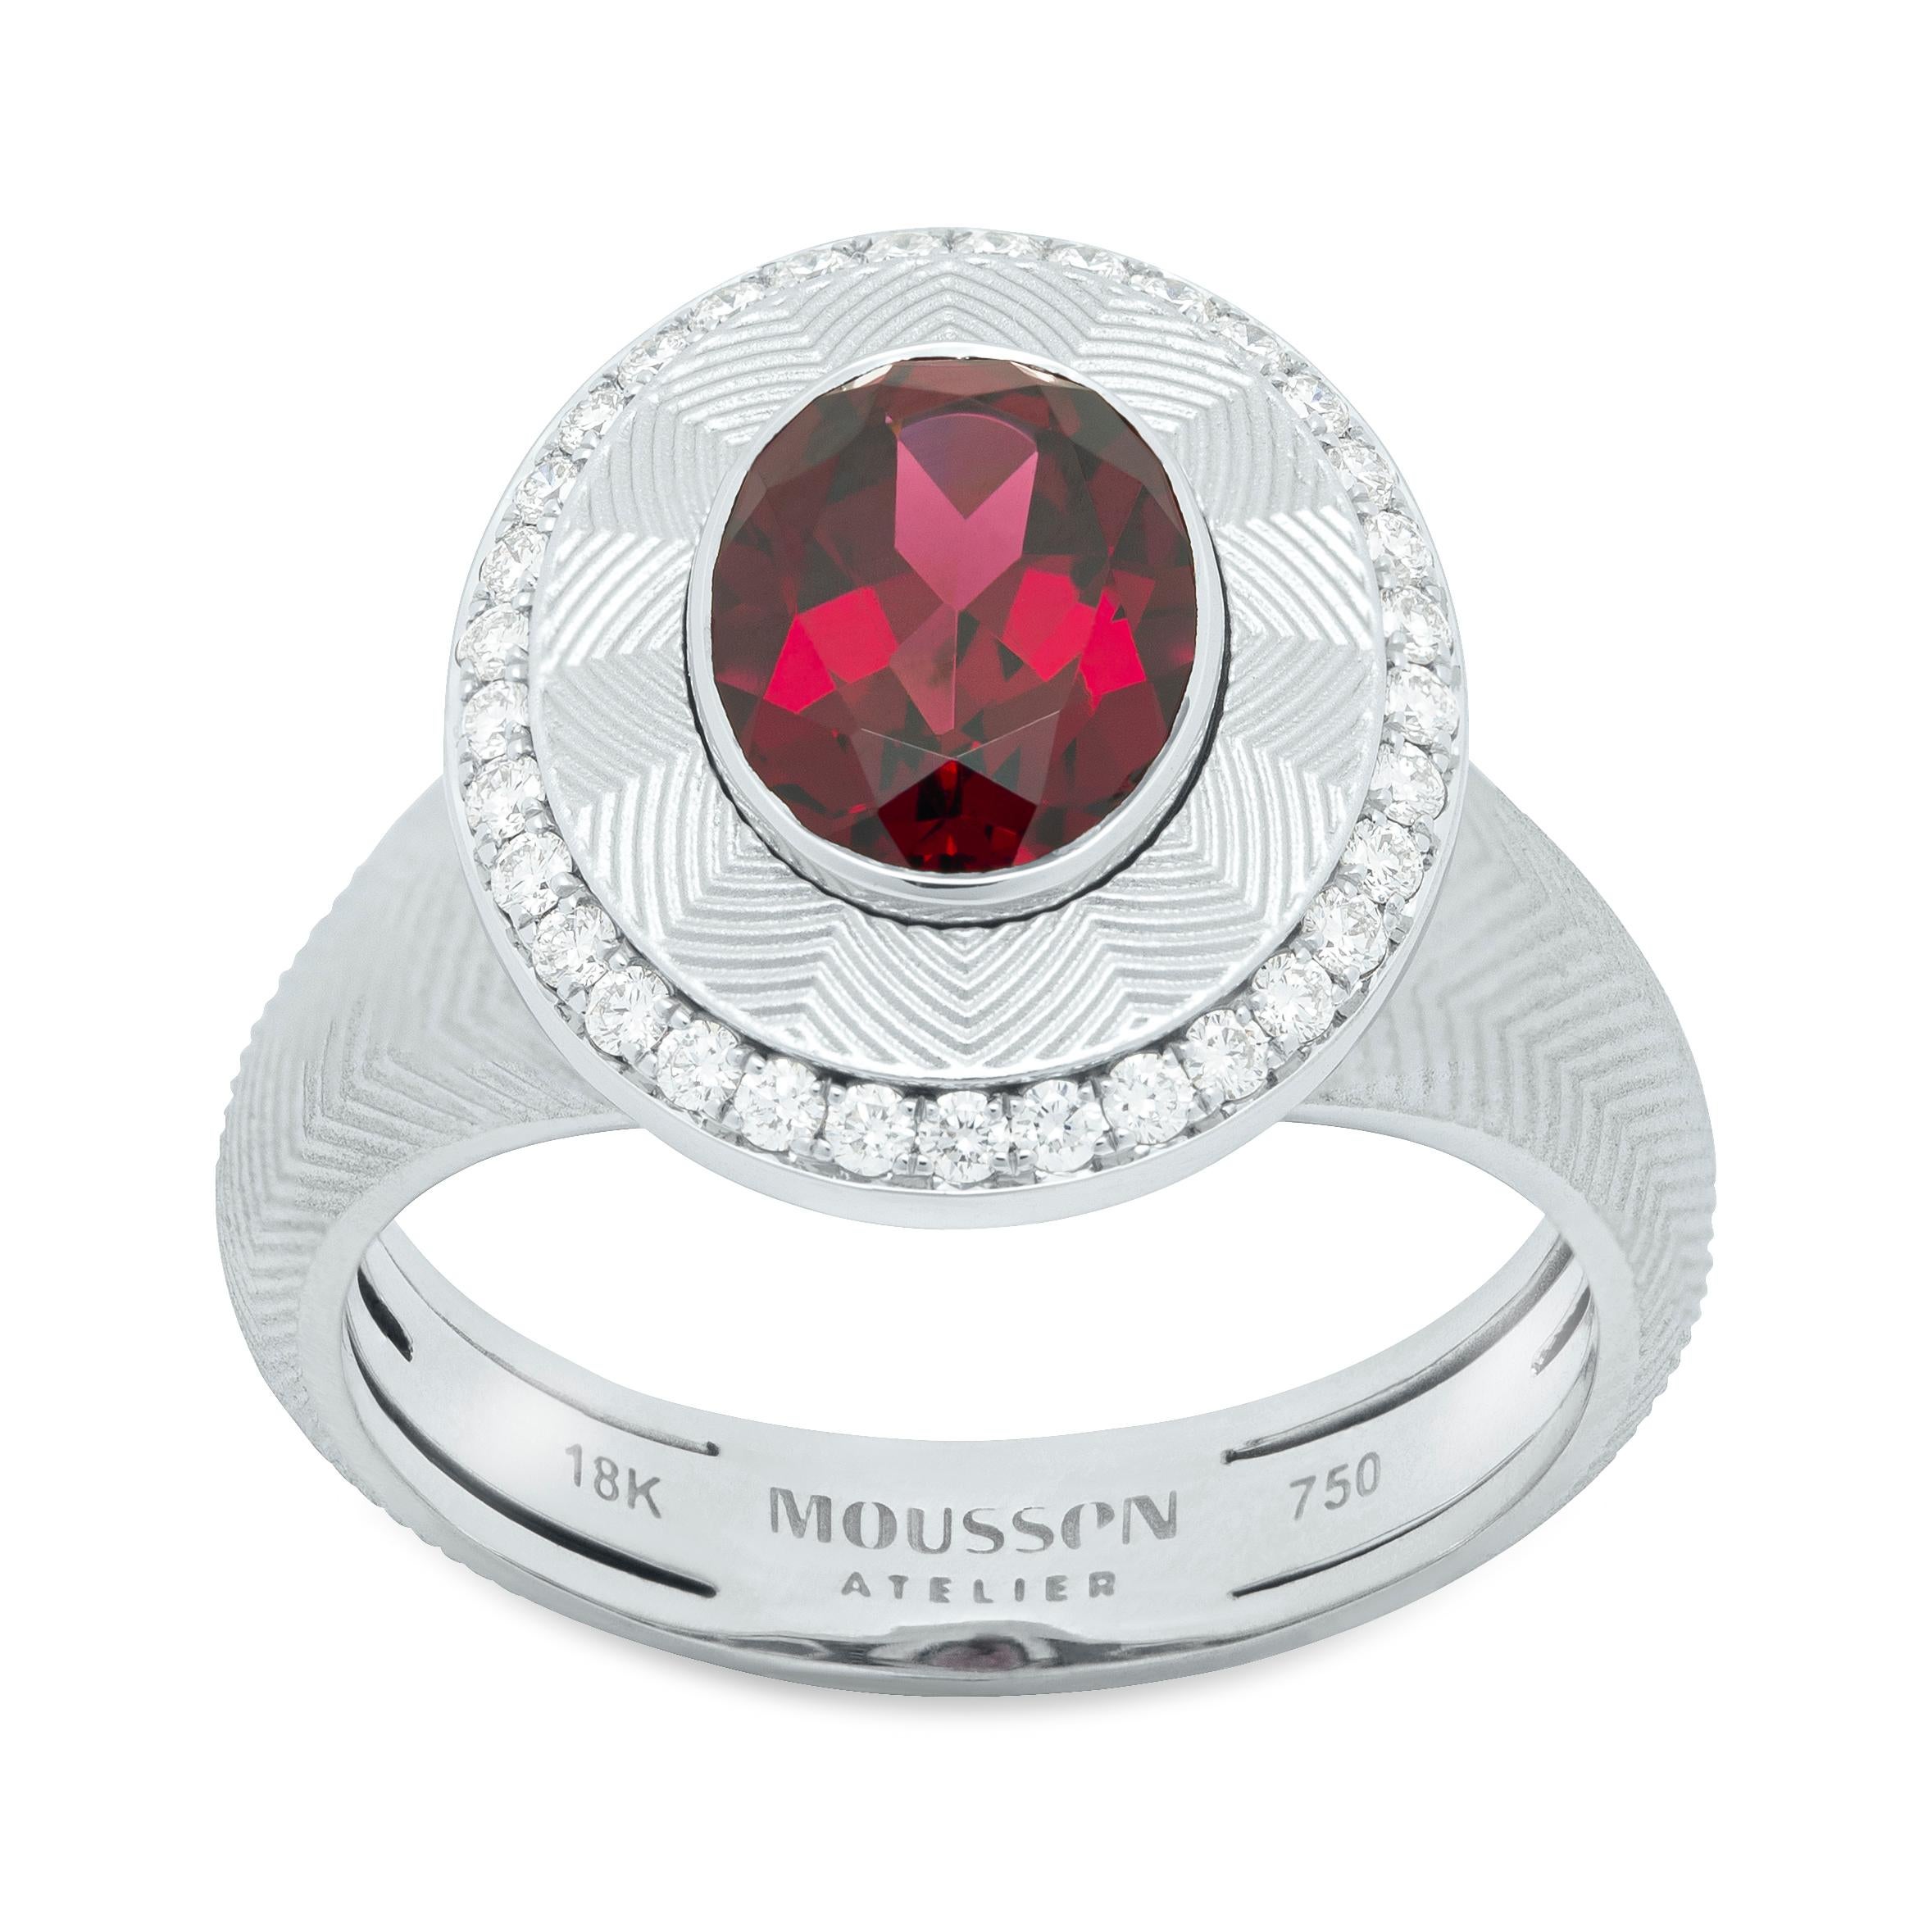 Rhodolite 2.51 Carat Diamonds 18 Karat White Gold Tweed Ring
Perhaps this is the brightest and most popular representative of the Pret-a-Porter collection. The texture of Tweed reminds of the well-known fabric, but most importantly, it reminds of